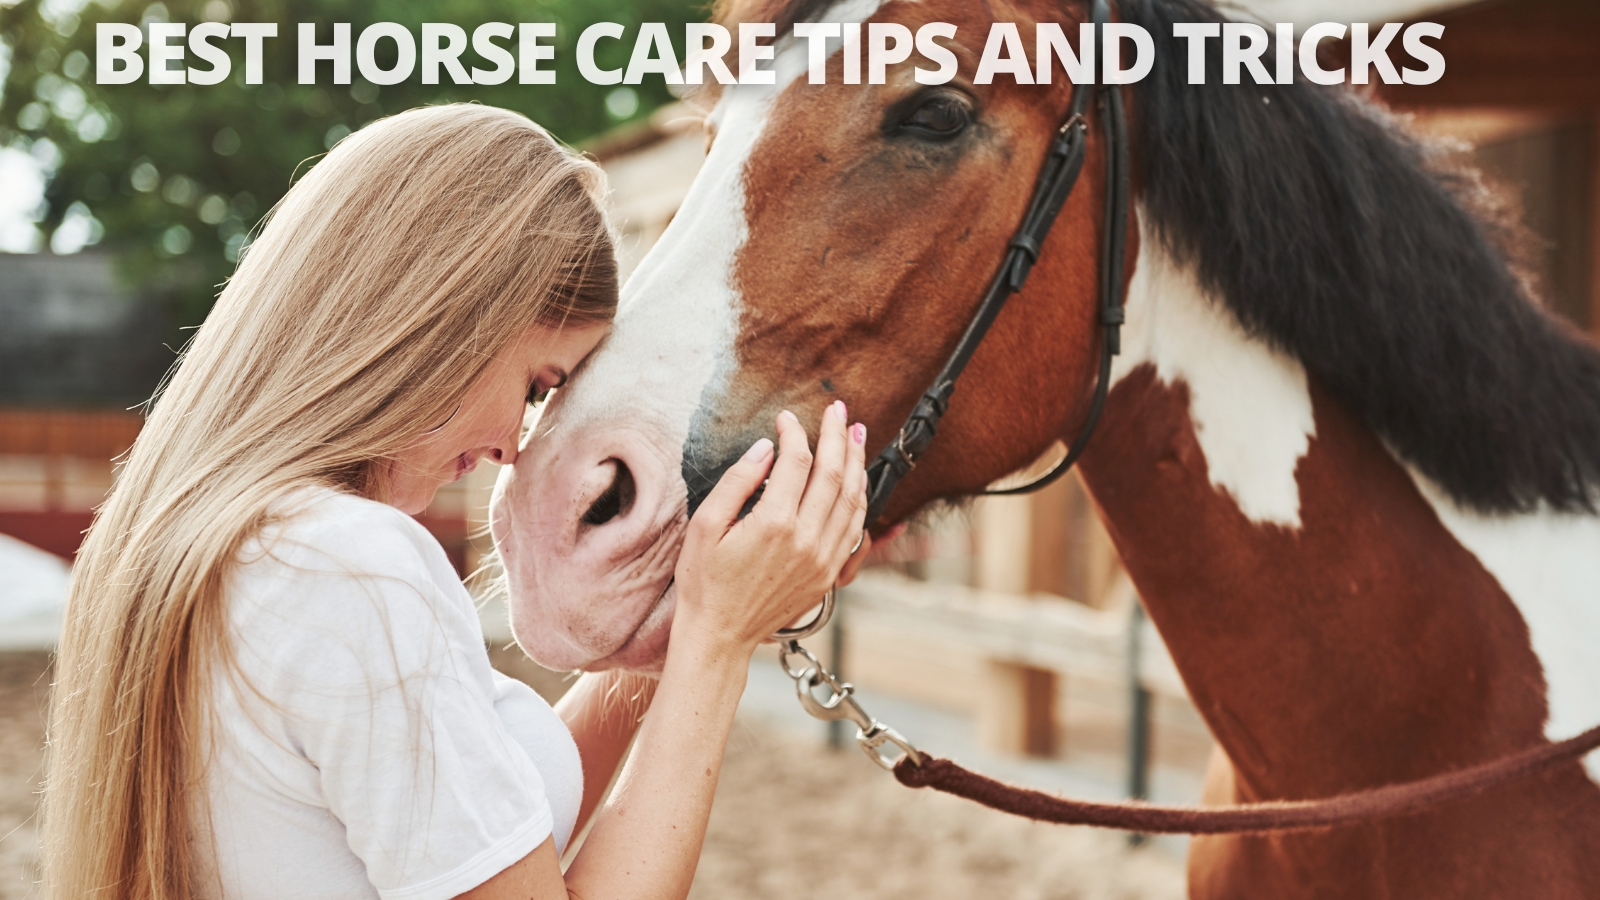 Best Horse Care Tips And Tricks